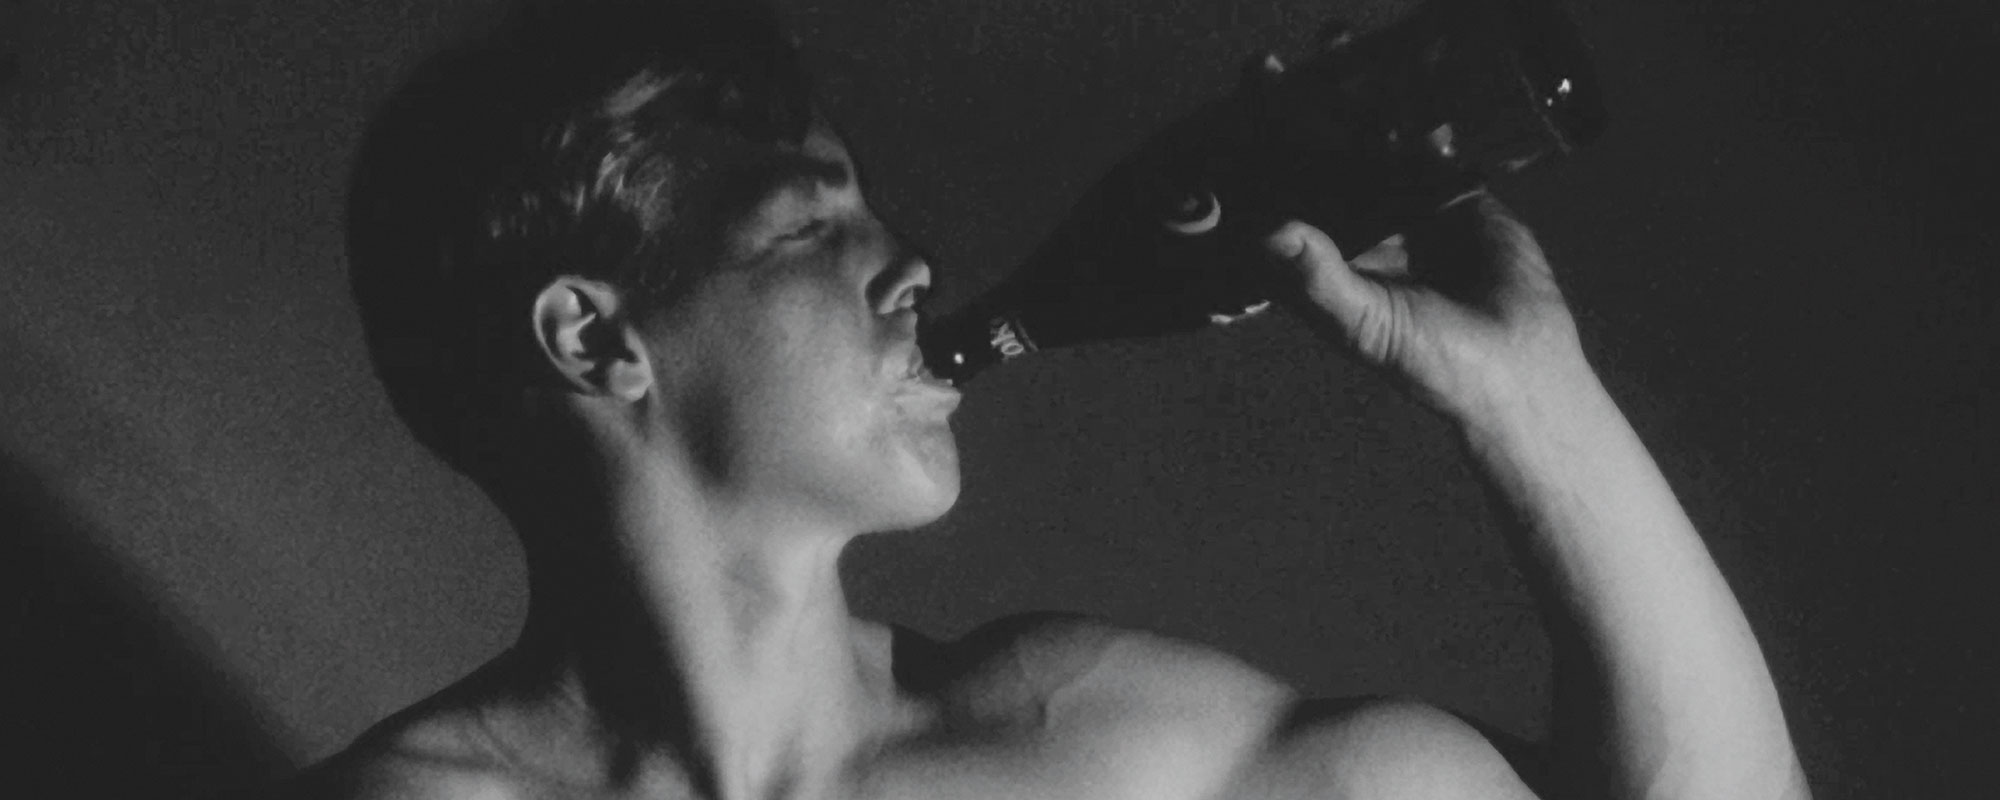 A still from a black and white Warhol movie of a bare chested young man, drinking out of a bottle